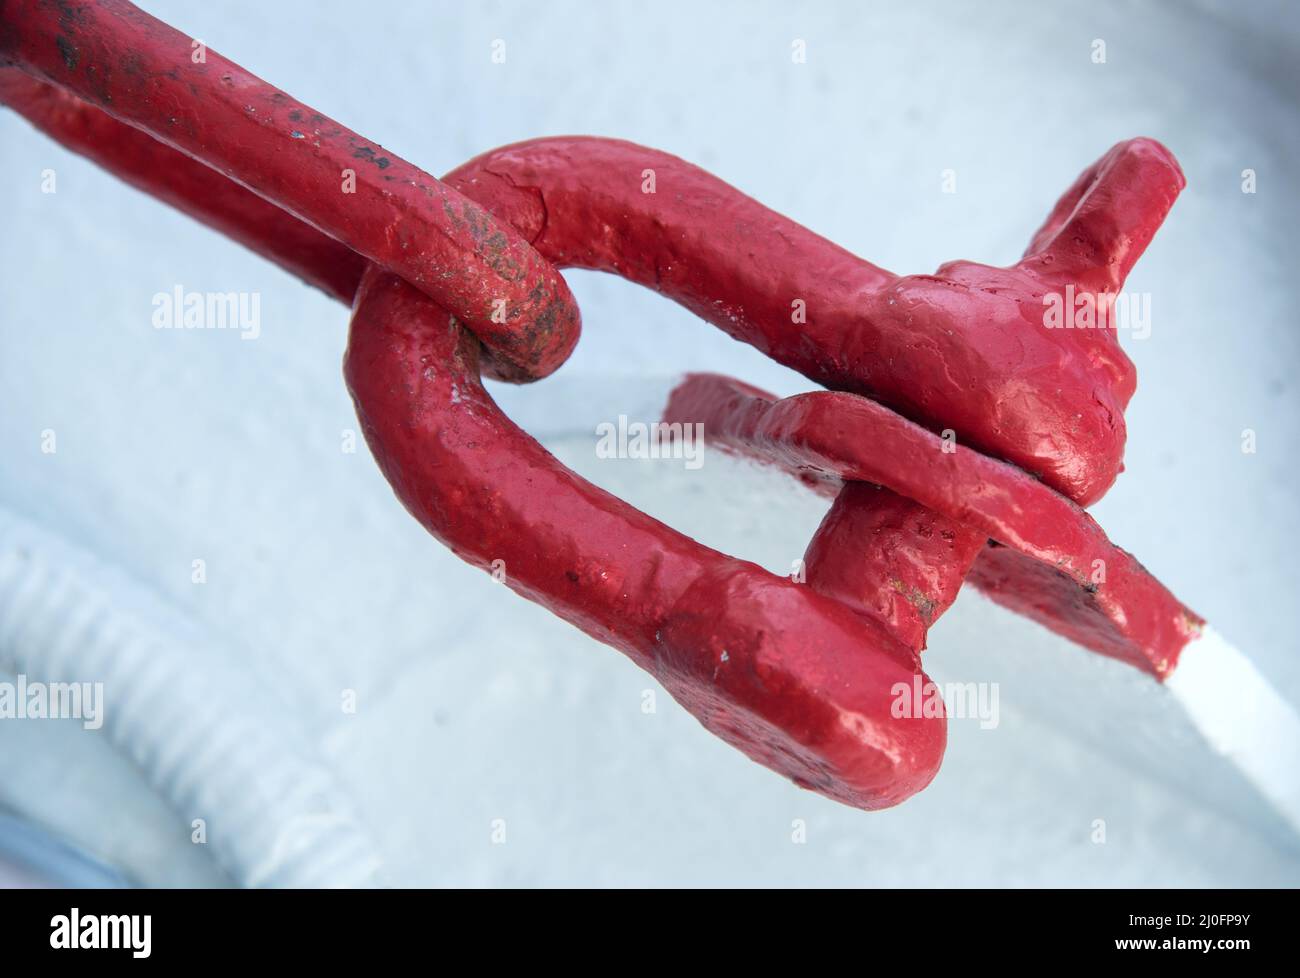 Red heavy industrial anchor shackle Stock Photo